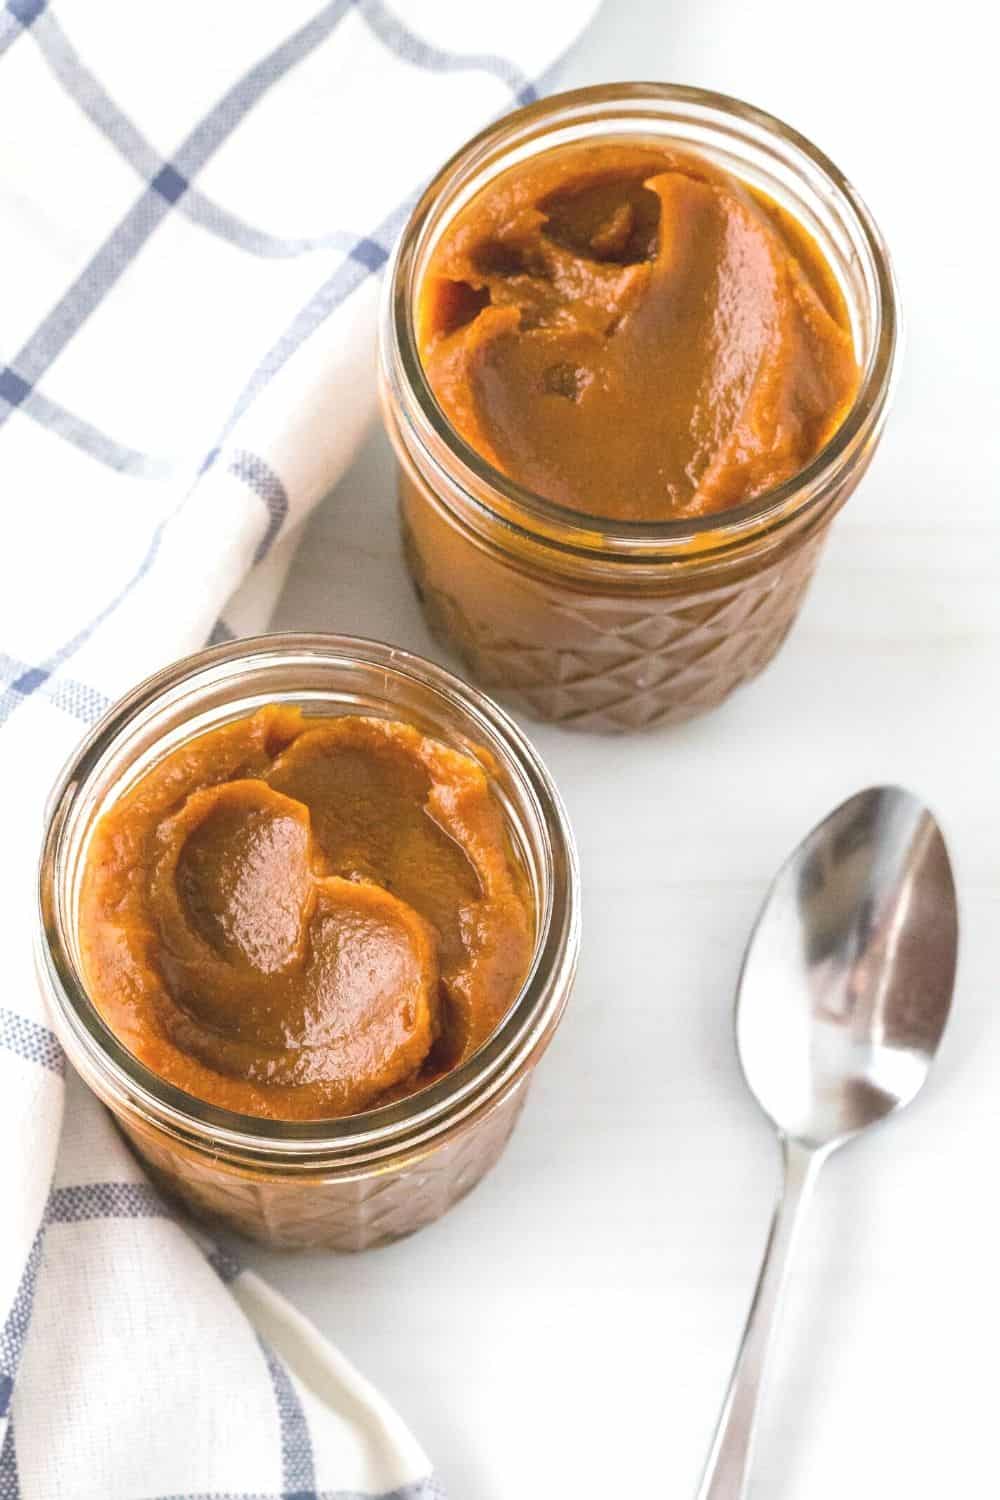 two jars of pumpkin butter with a spoon next to them